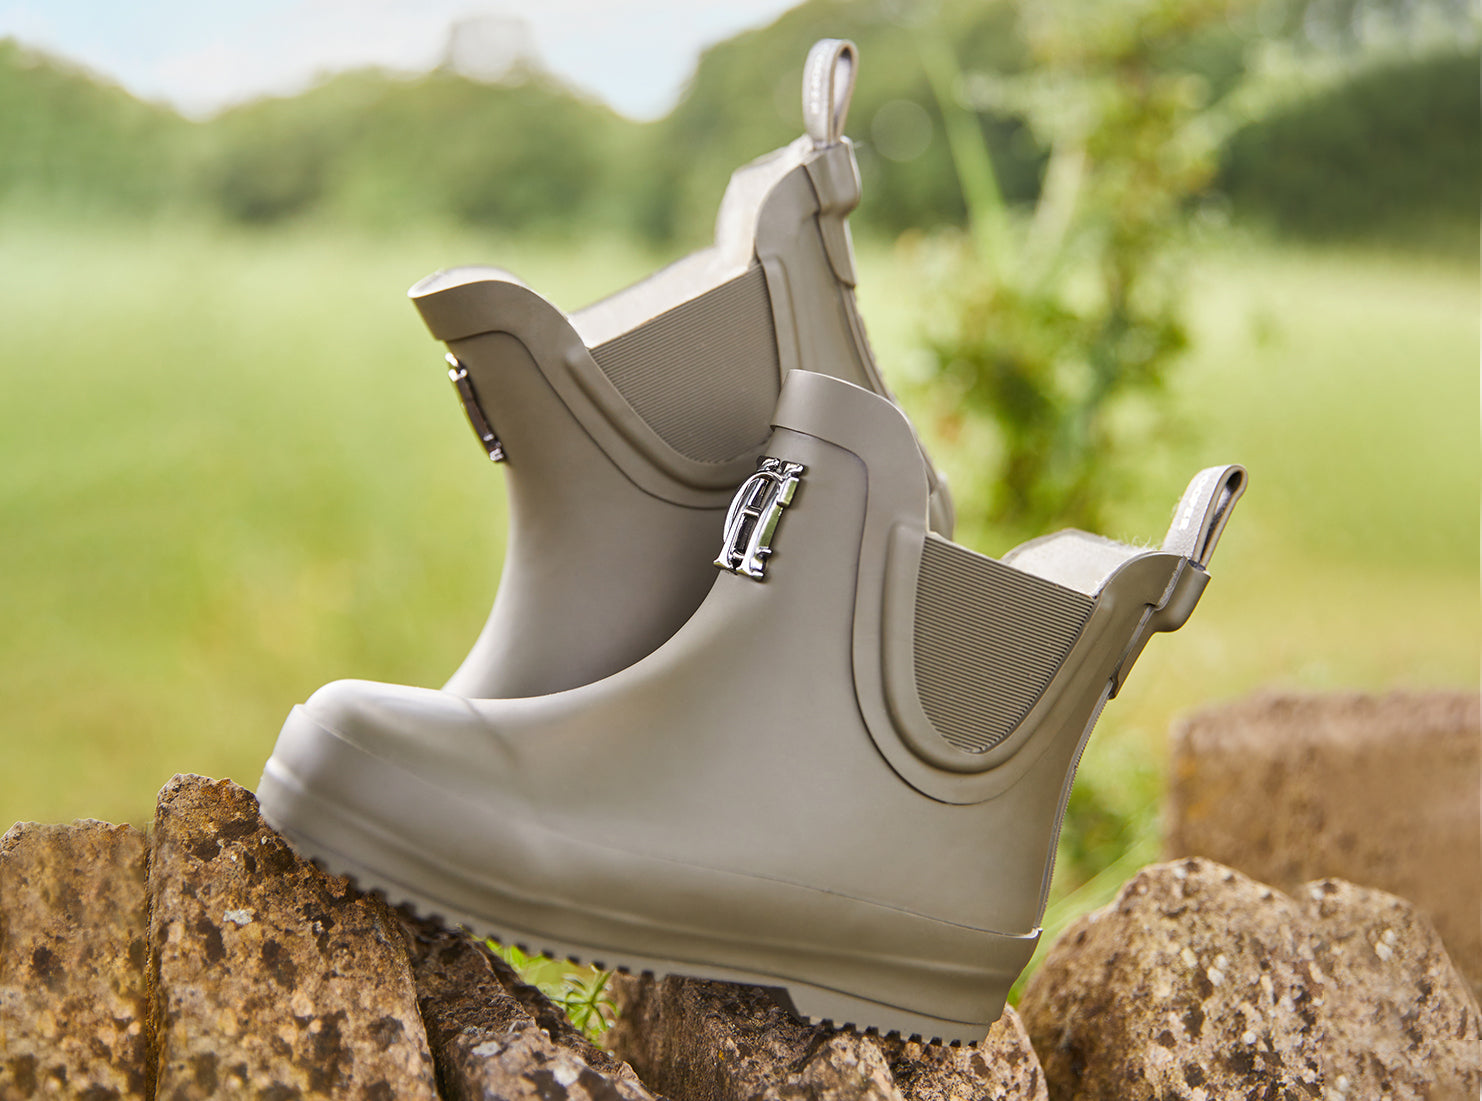 Children's wellingtons in green sat on cotswold stone wall with a green grass background